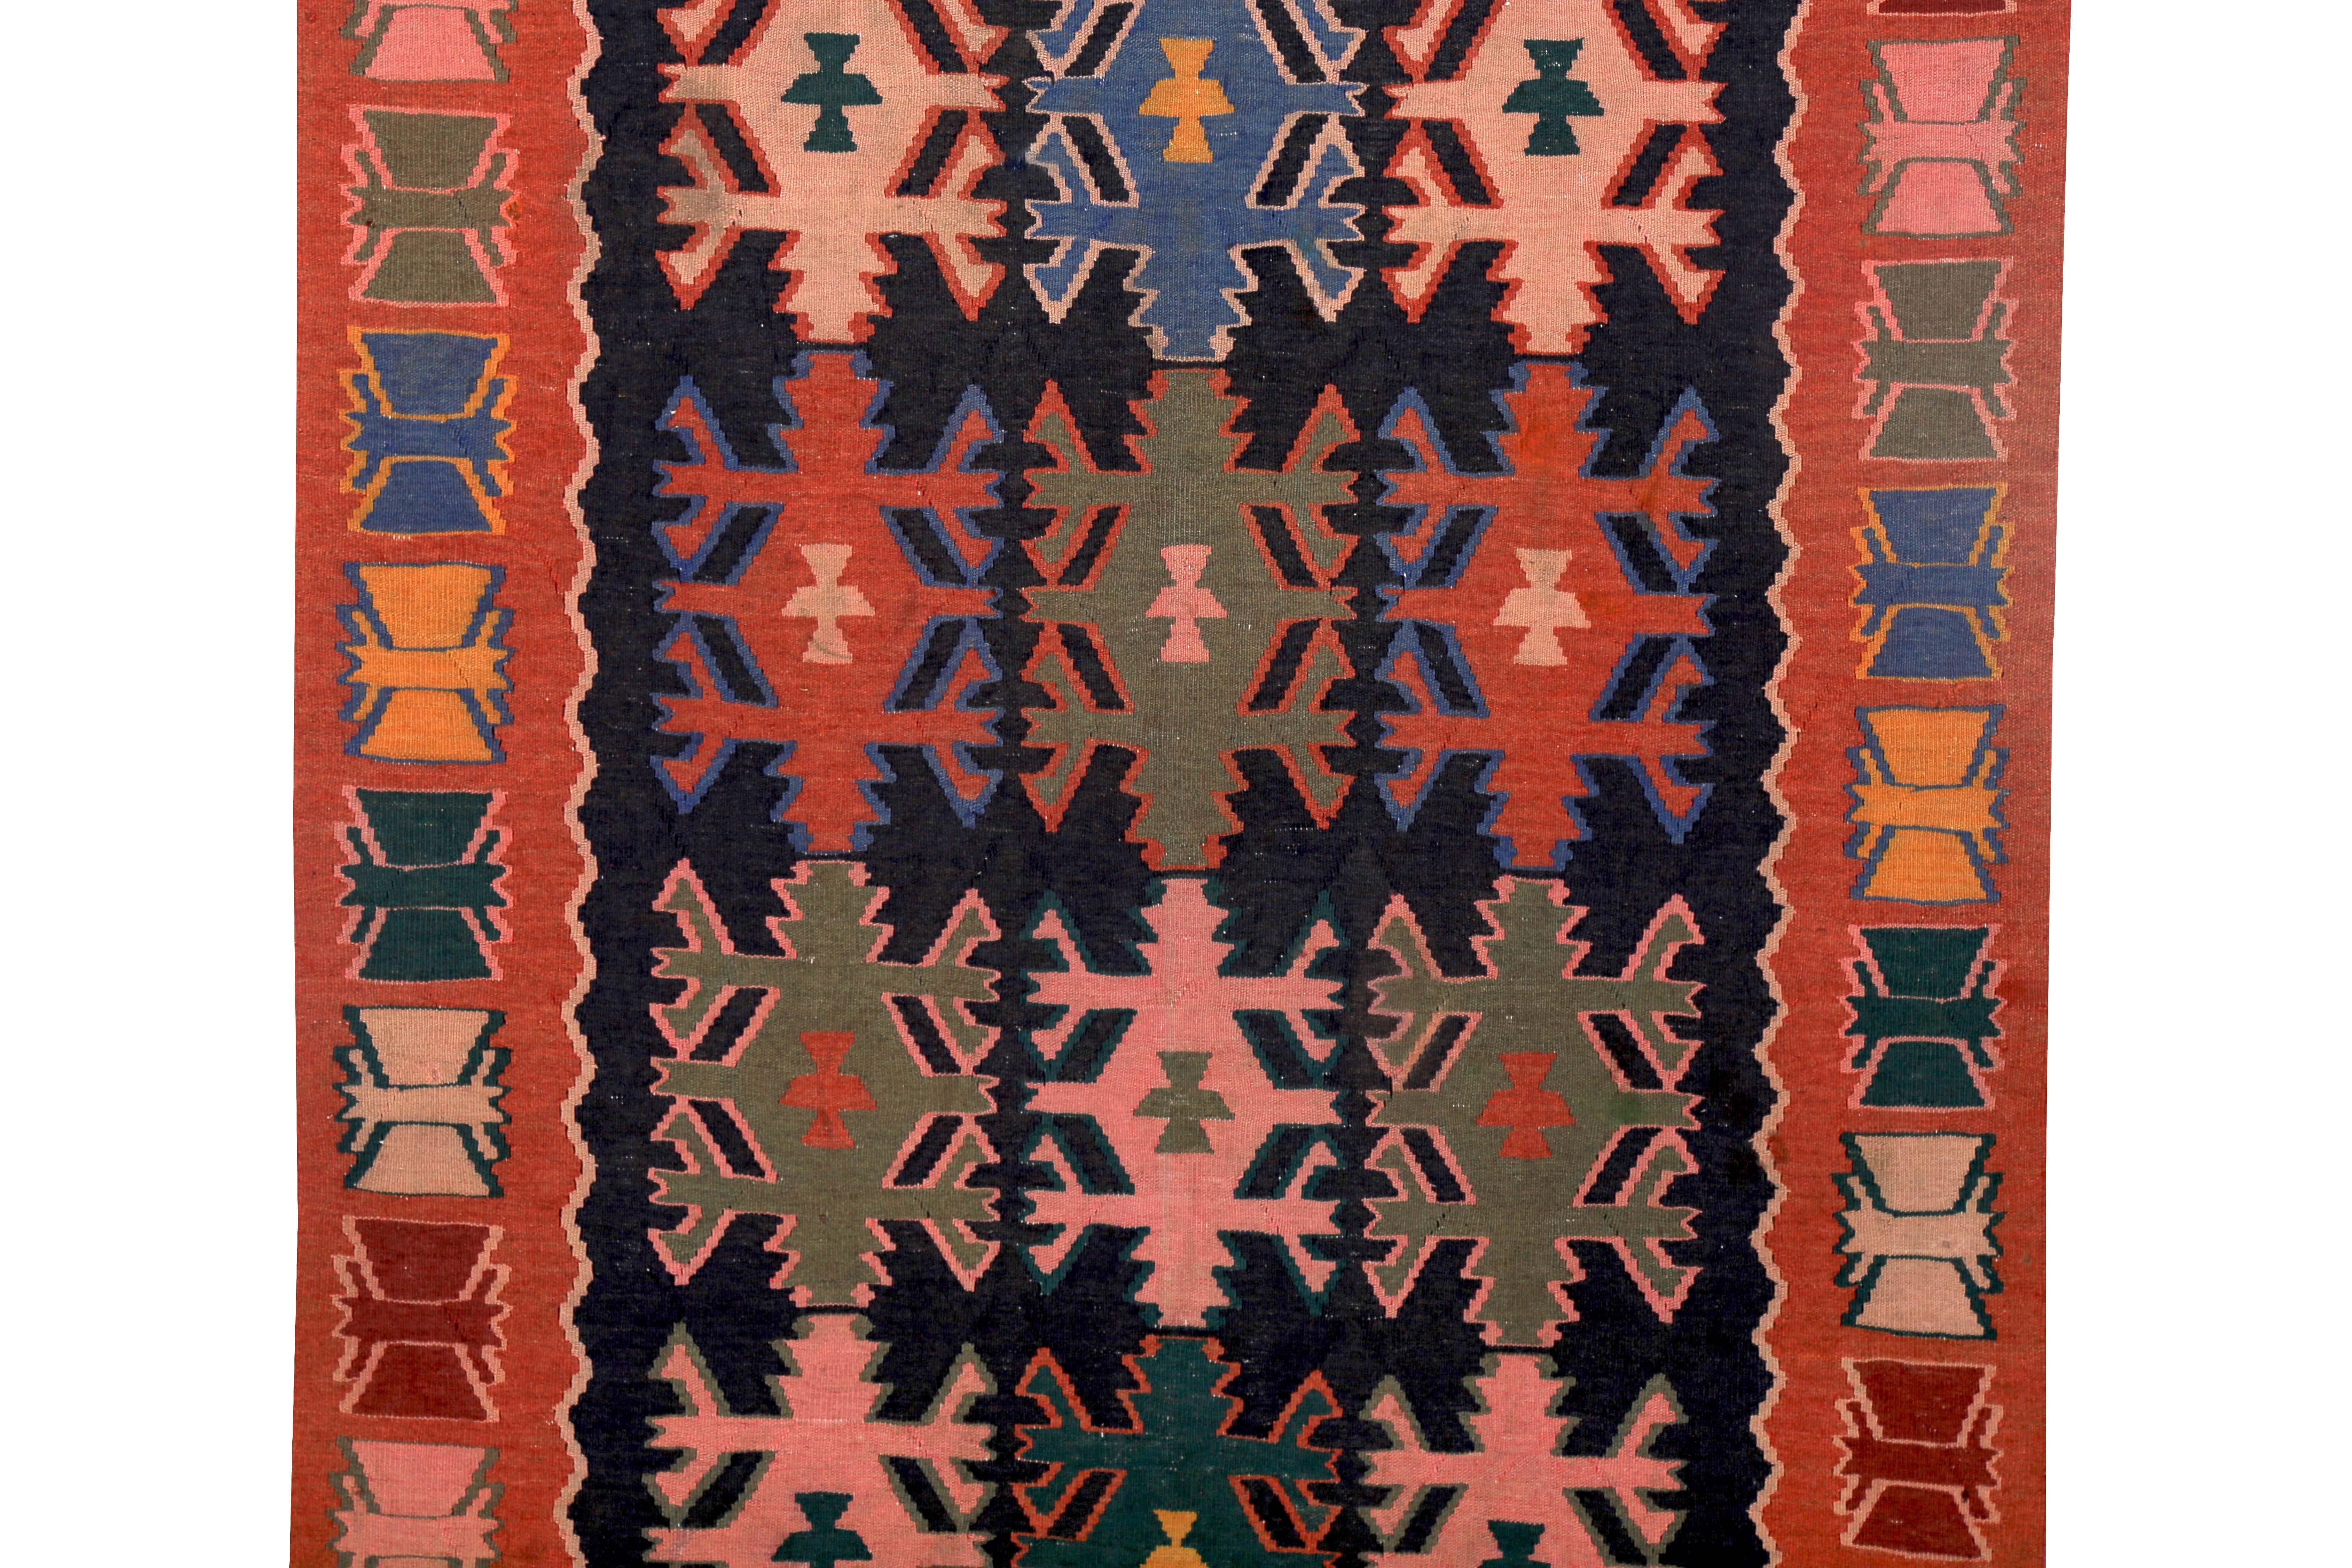 Hand-Woven Turkish Kilim Runner Rug with Tribal Details in Green, Blue and Pink For Sale